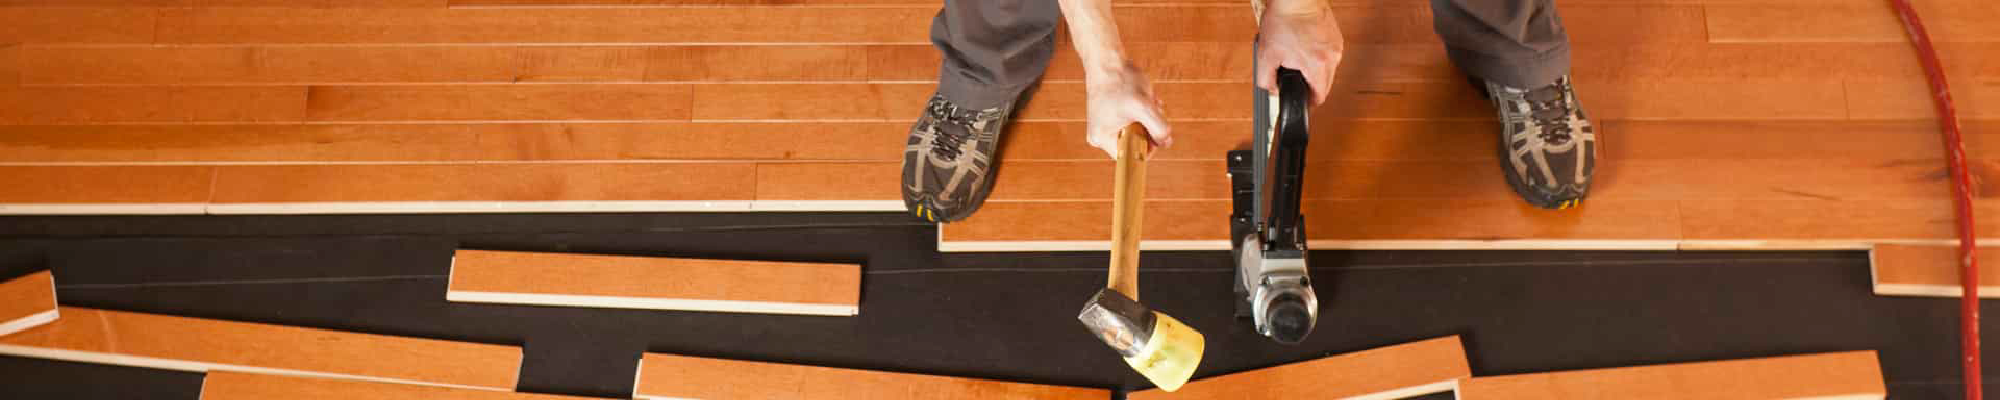 Flooring Services from Carpet Mill Outlet USA in Roscoe, IL